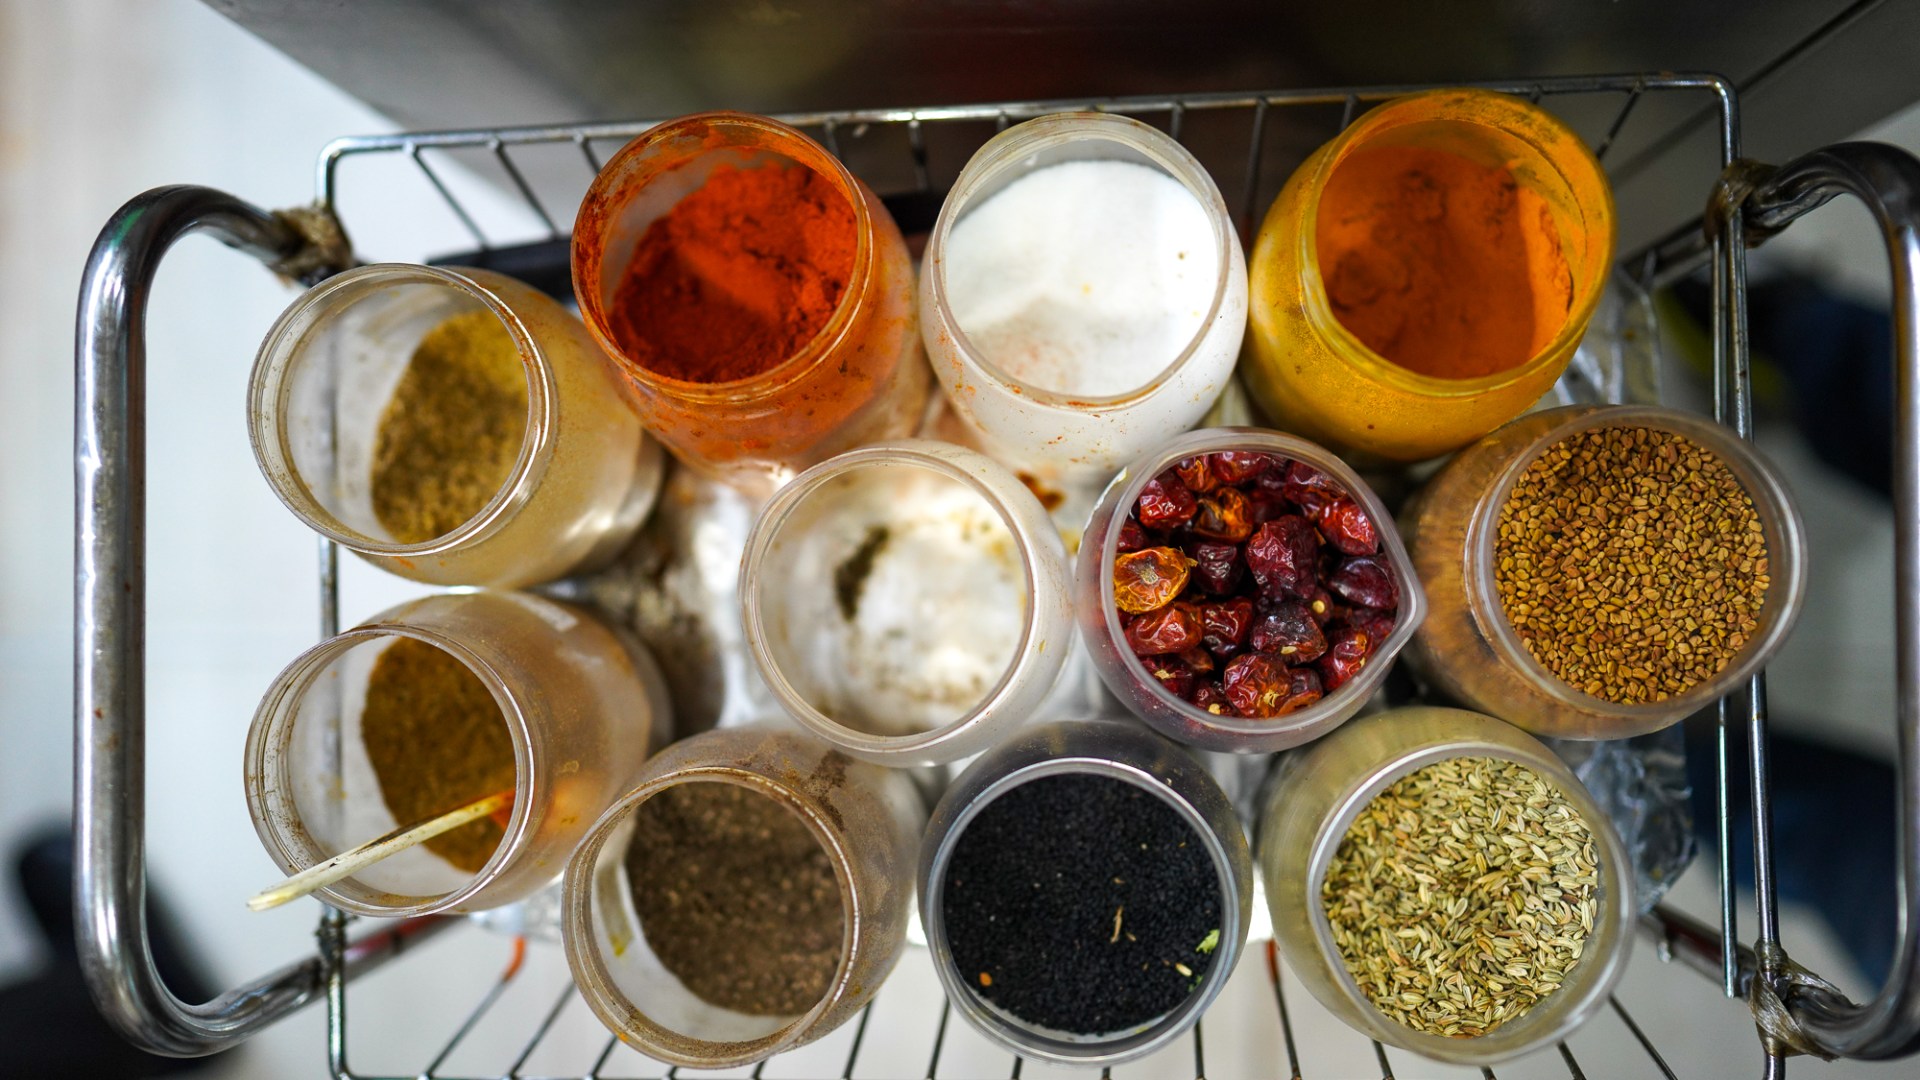 A view of the well-used spice rick in the kitchen of Punjab restaurant